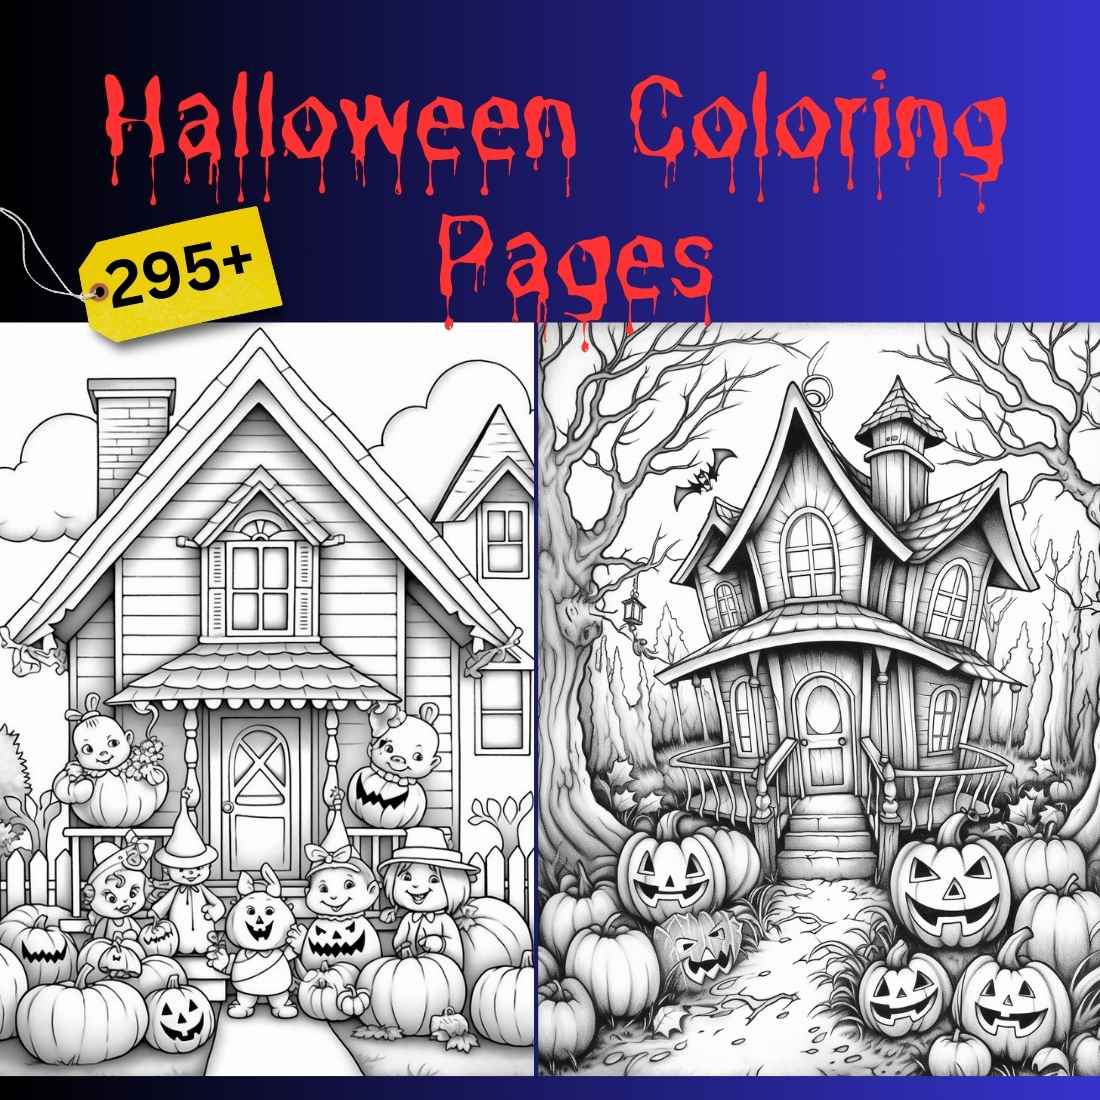 295+ Halloween House Coloring Pages cover image.